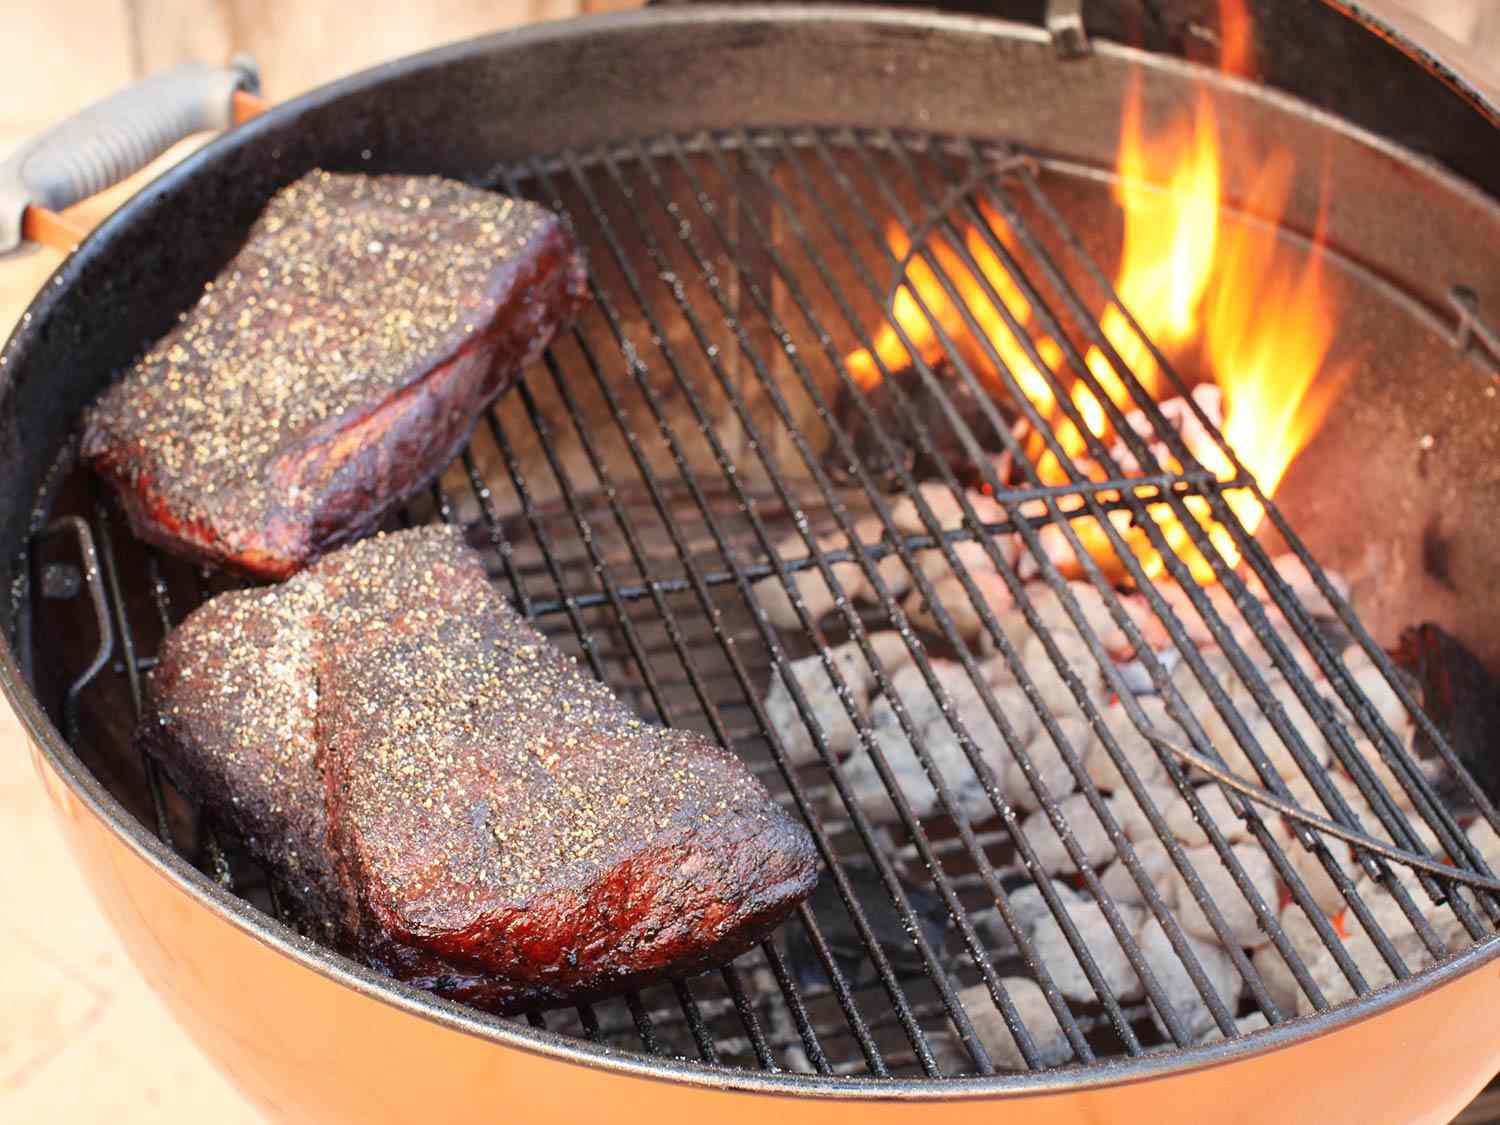 Two pieces of peppercorn-crusted brisket being smoked on small round barbecue.